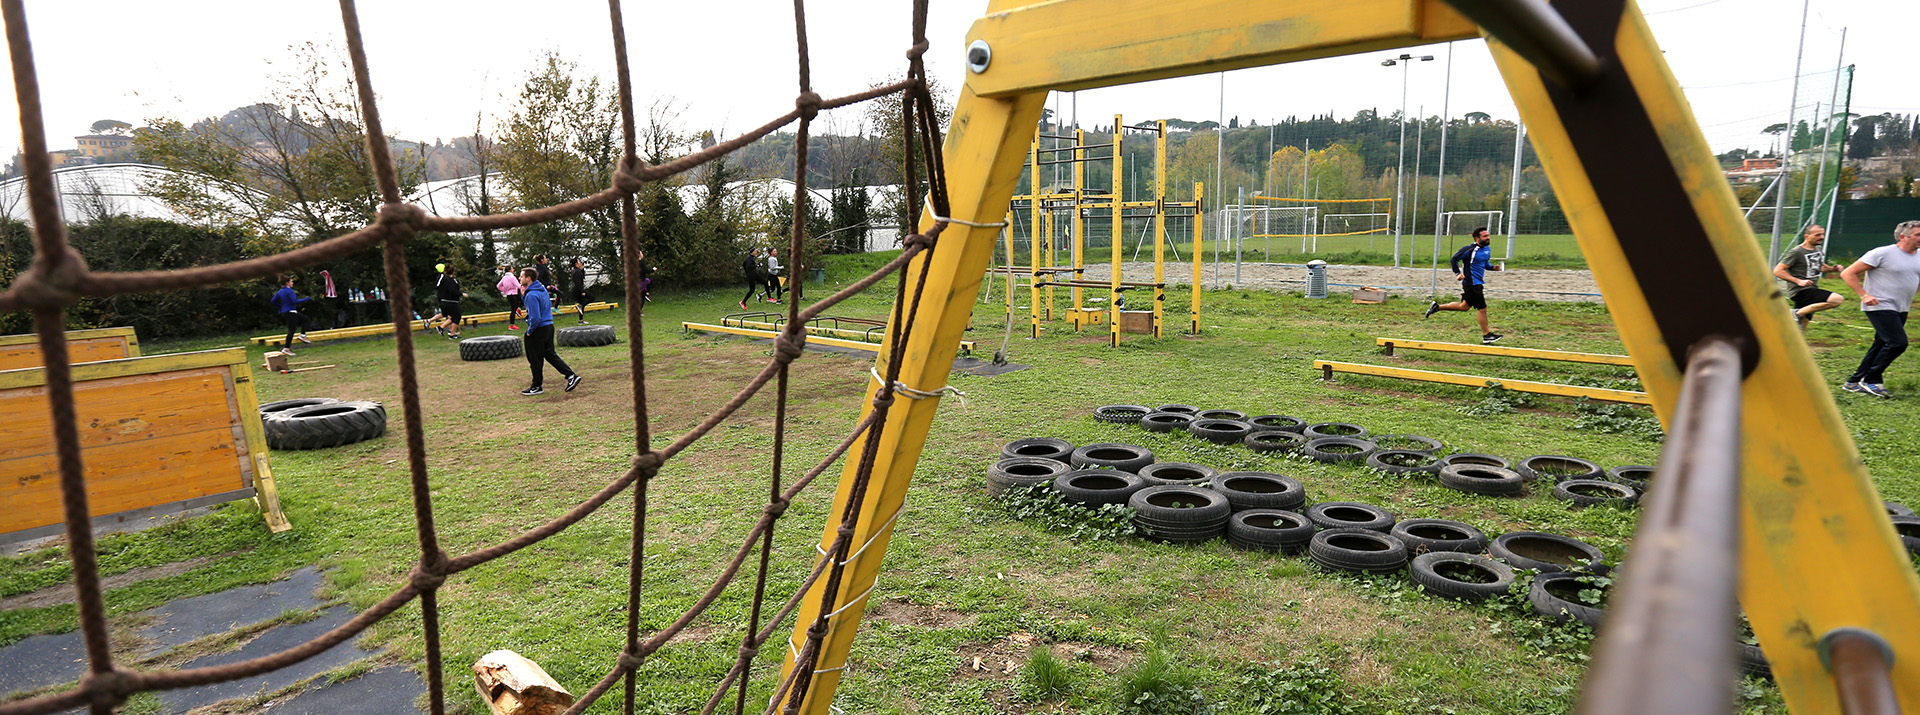 Palestra firenze outdoor fitness personal trainer